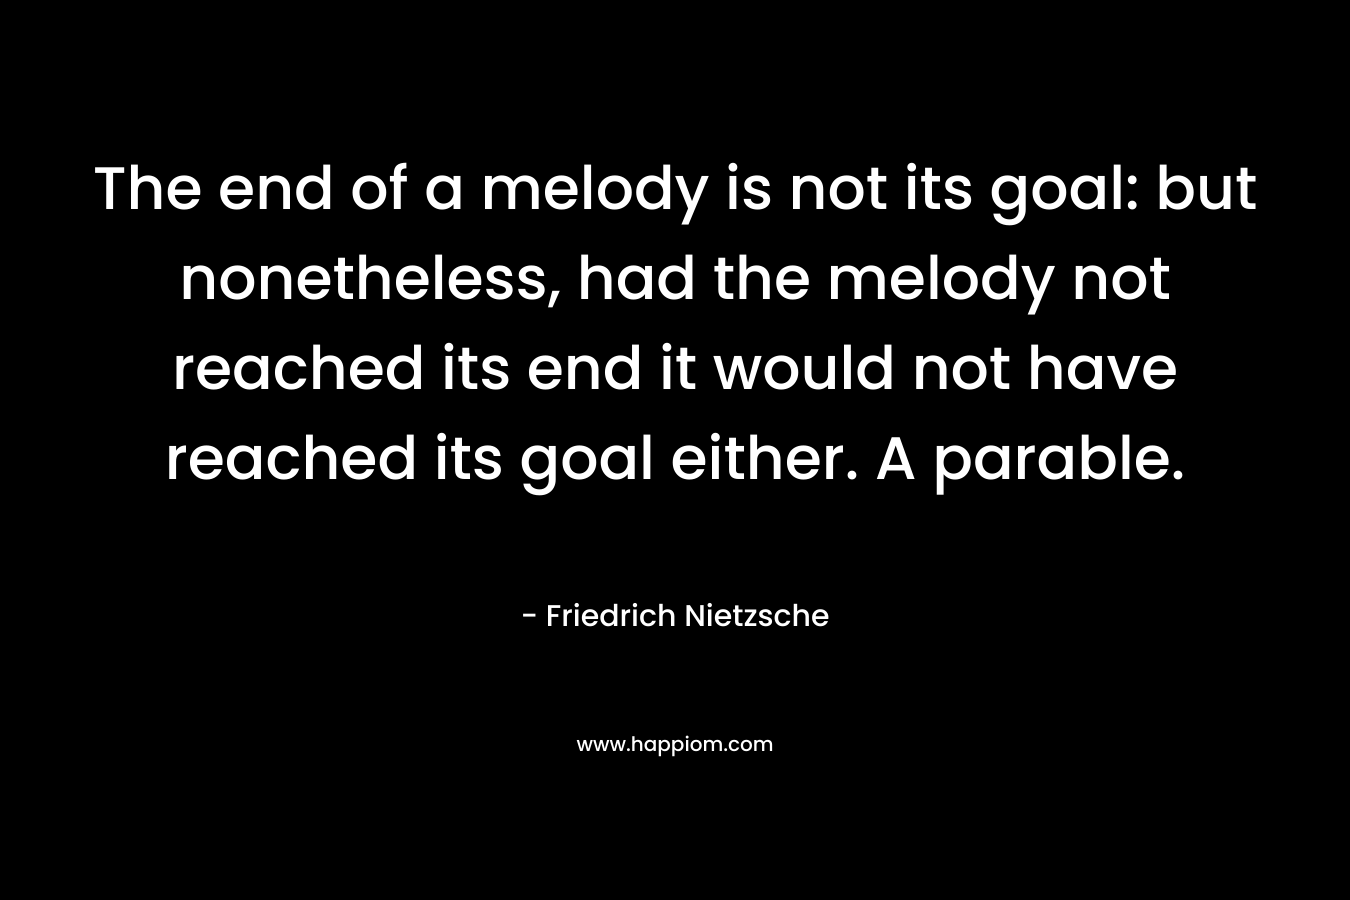 The end of a melody is not its goal: but nonetheless, had the melody not reached its end it would not have reached its goal either. A parable.